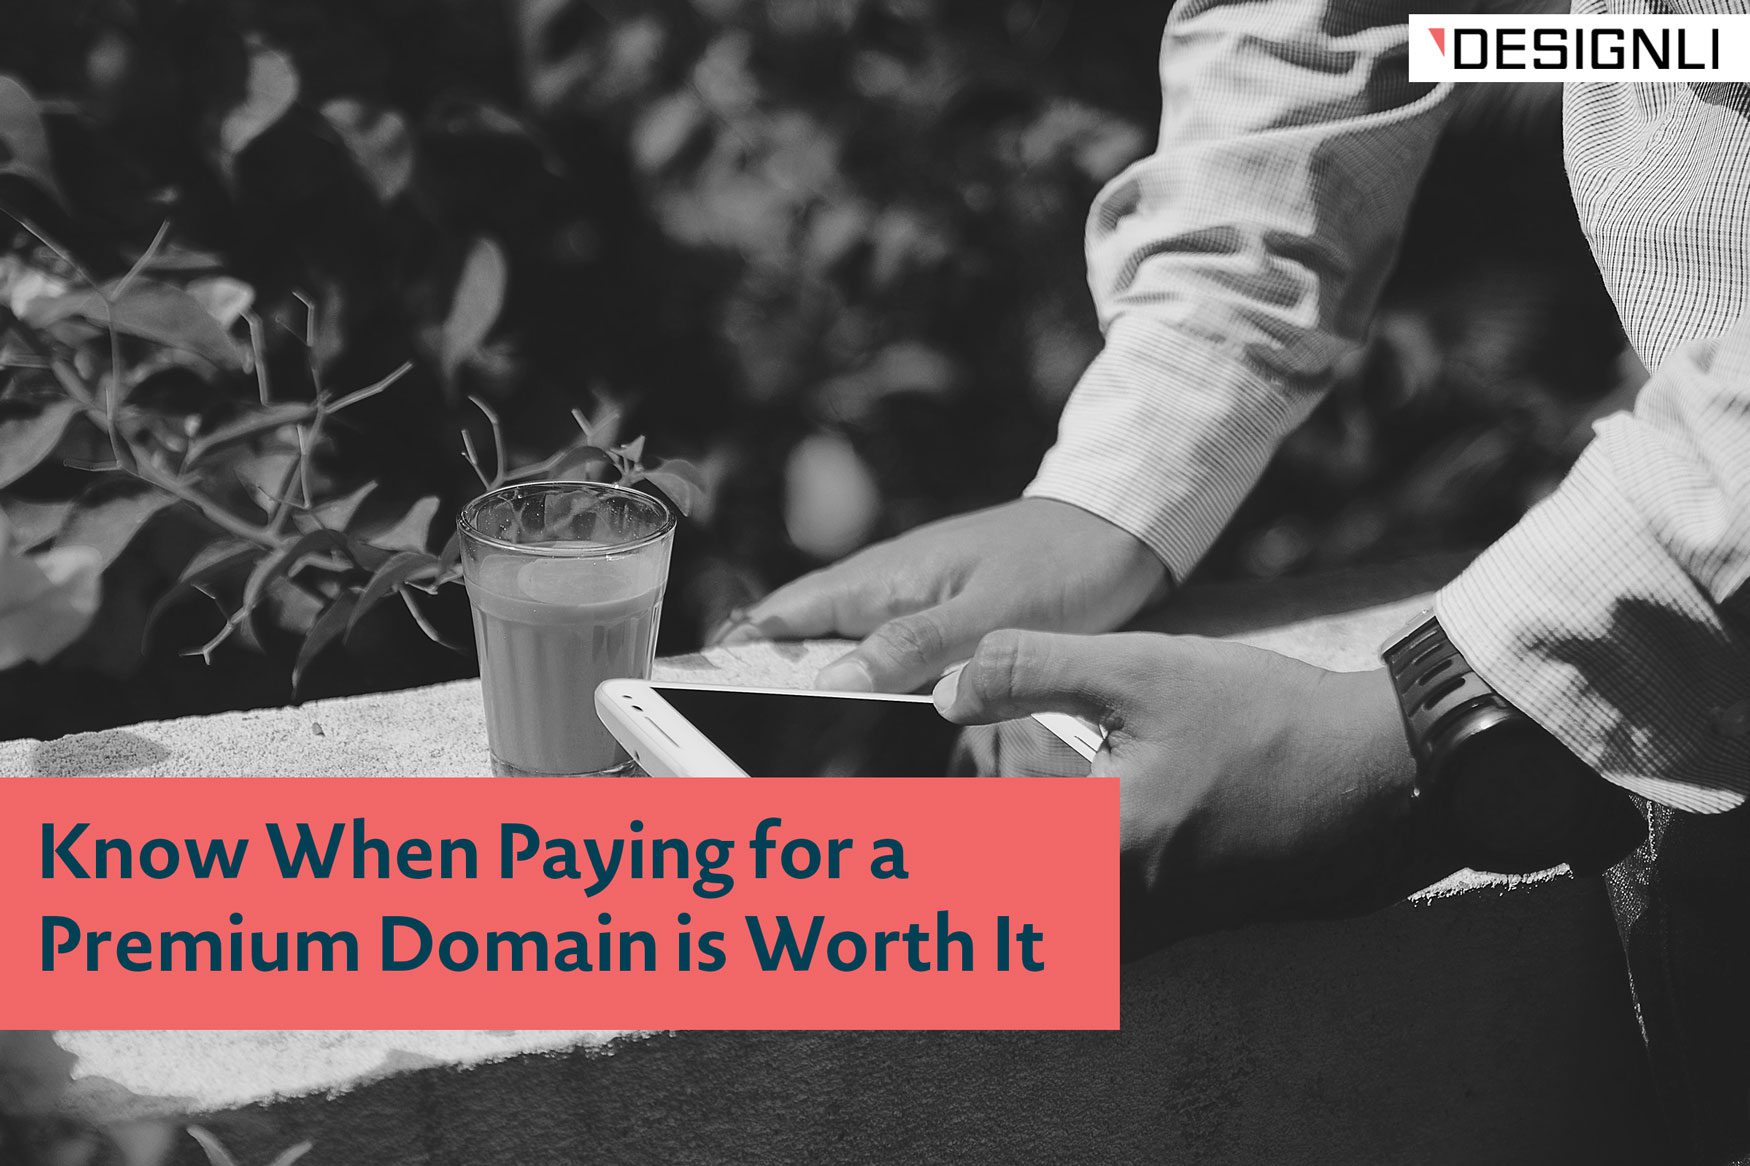 Know When Paying for a Premium Domain is Worth It